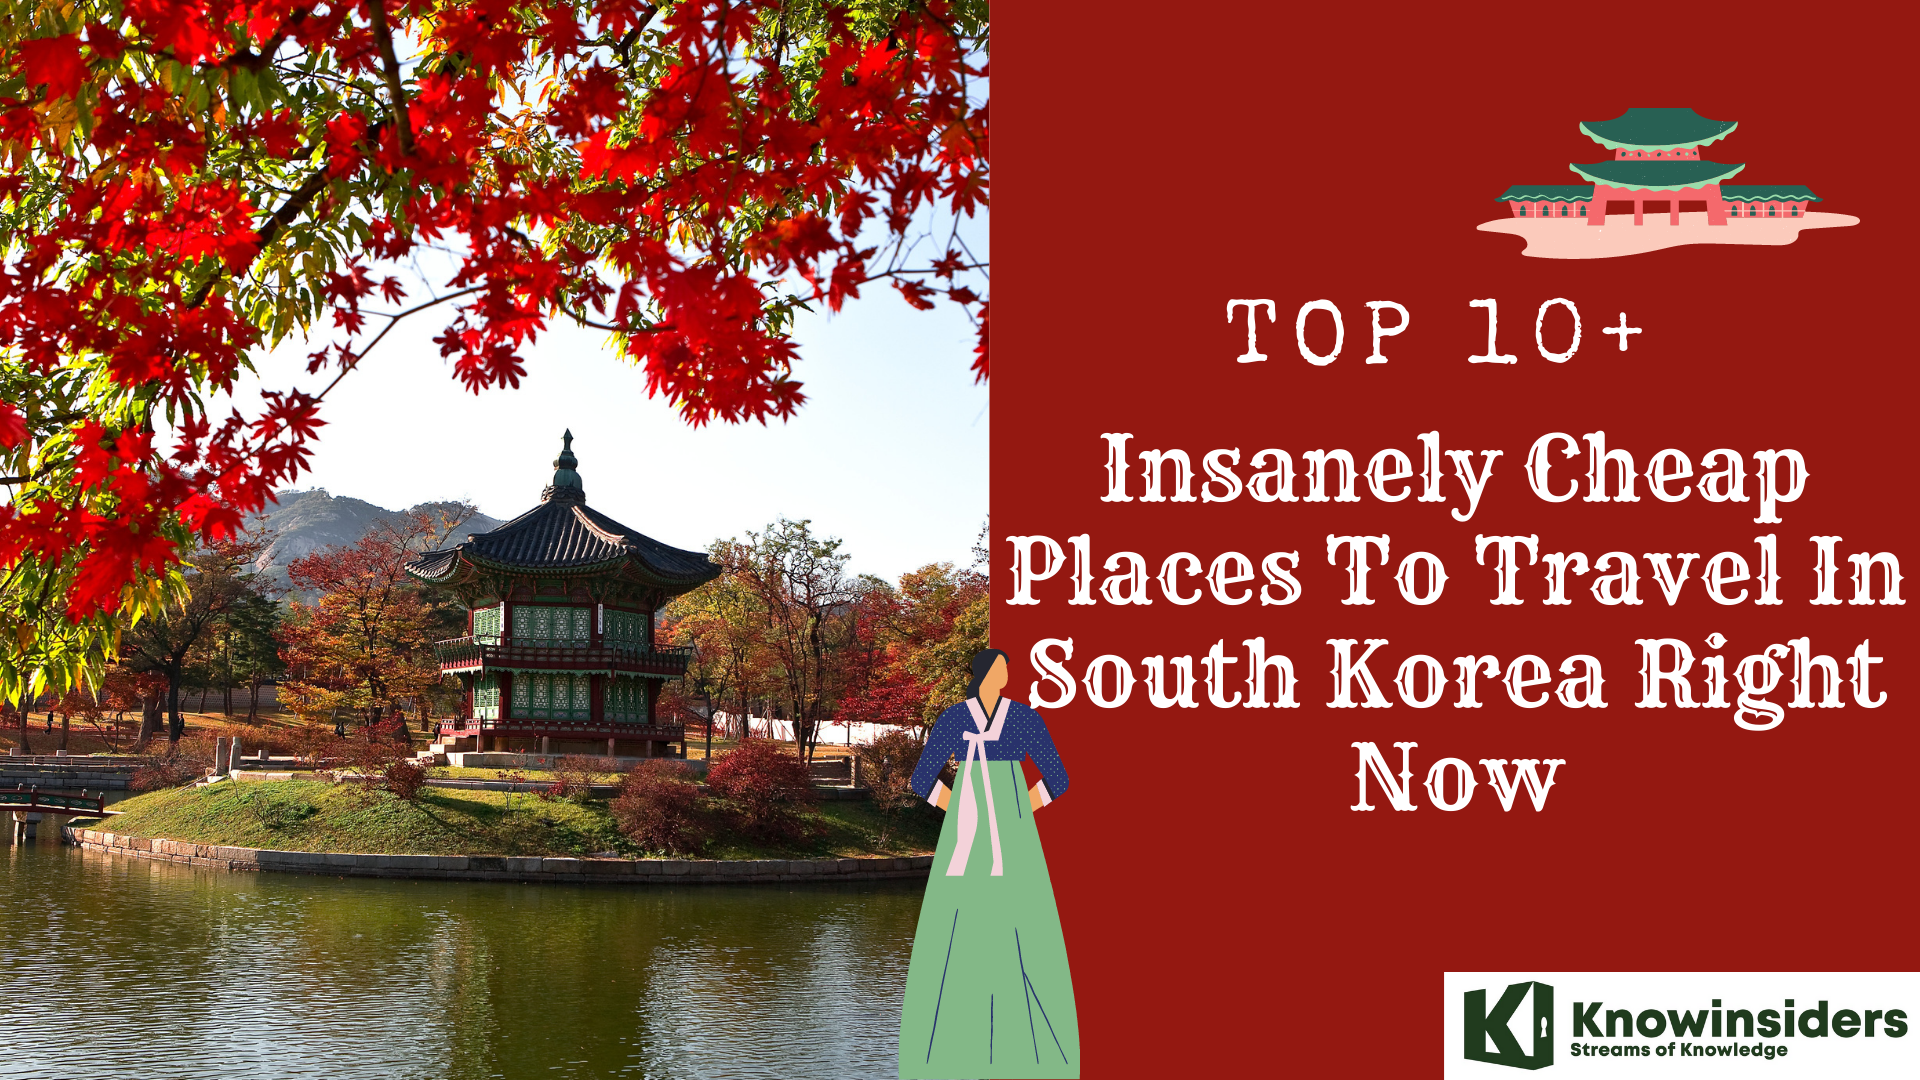 Top 10+ Insanely Cheap Places To Travel In South Korea